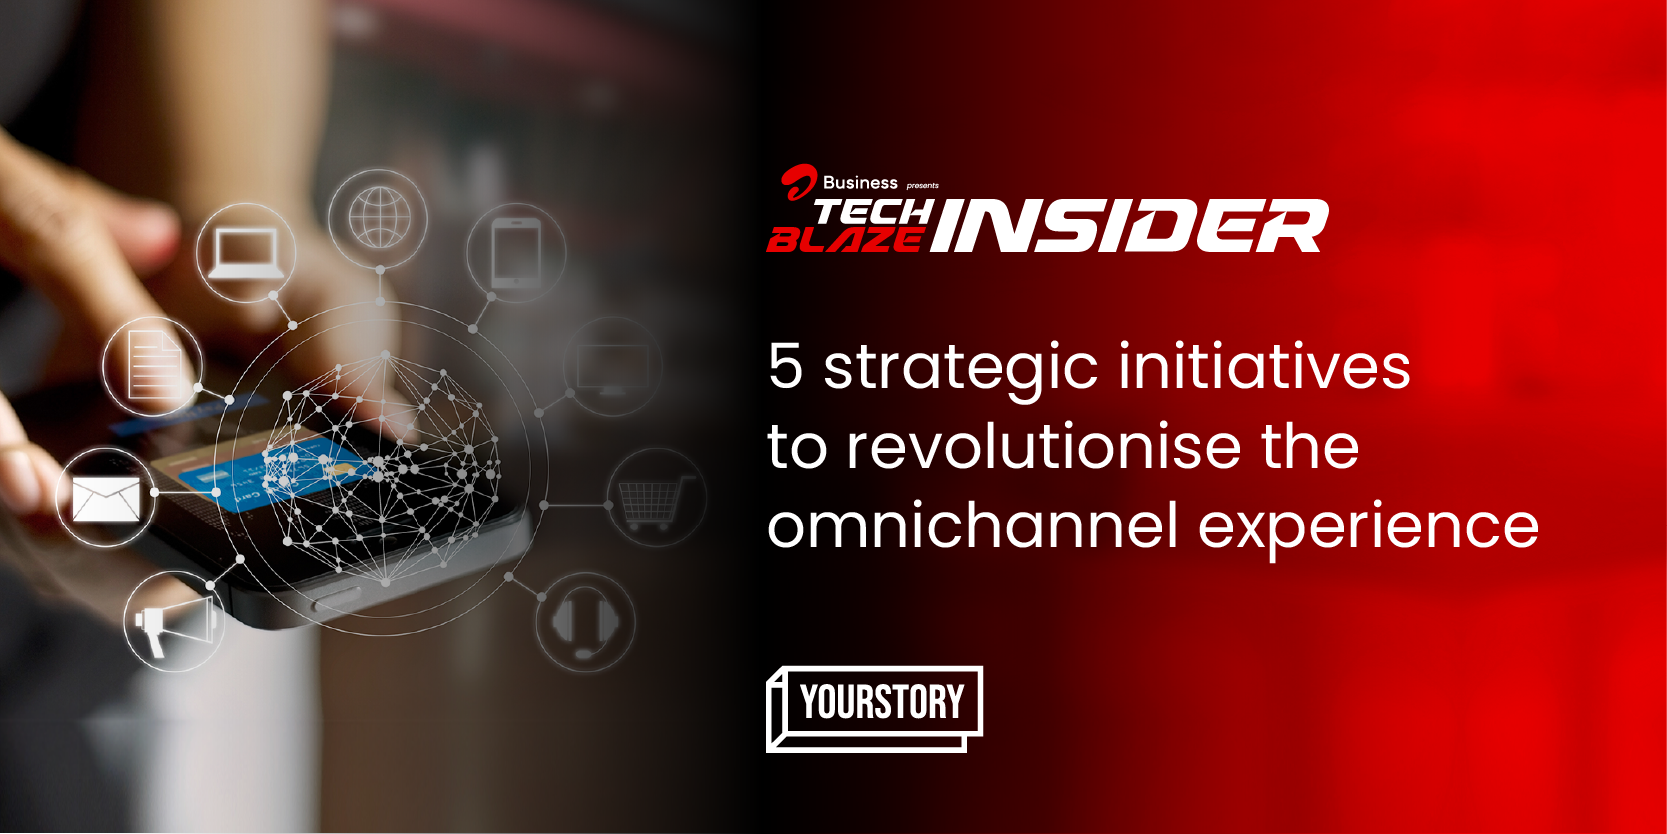 5 strategic initiatives to revolutionise the omnichannel experience